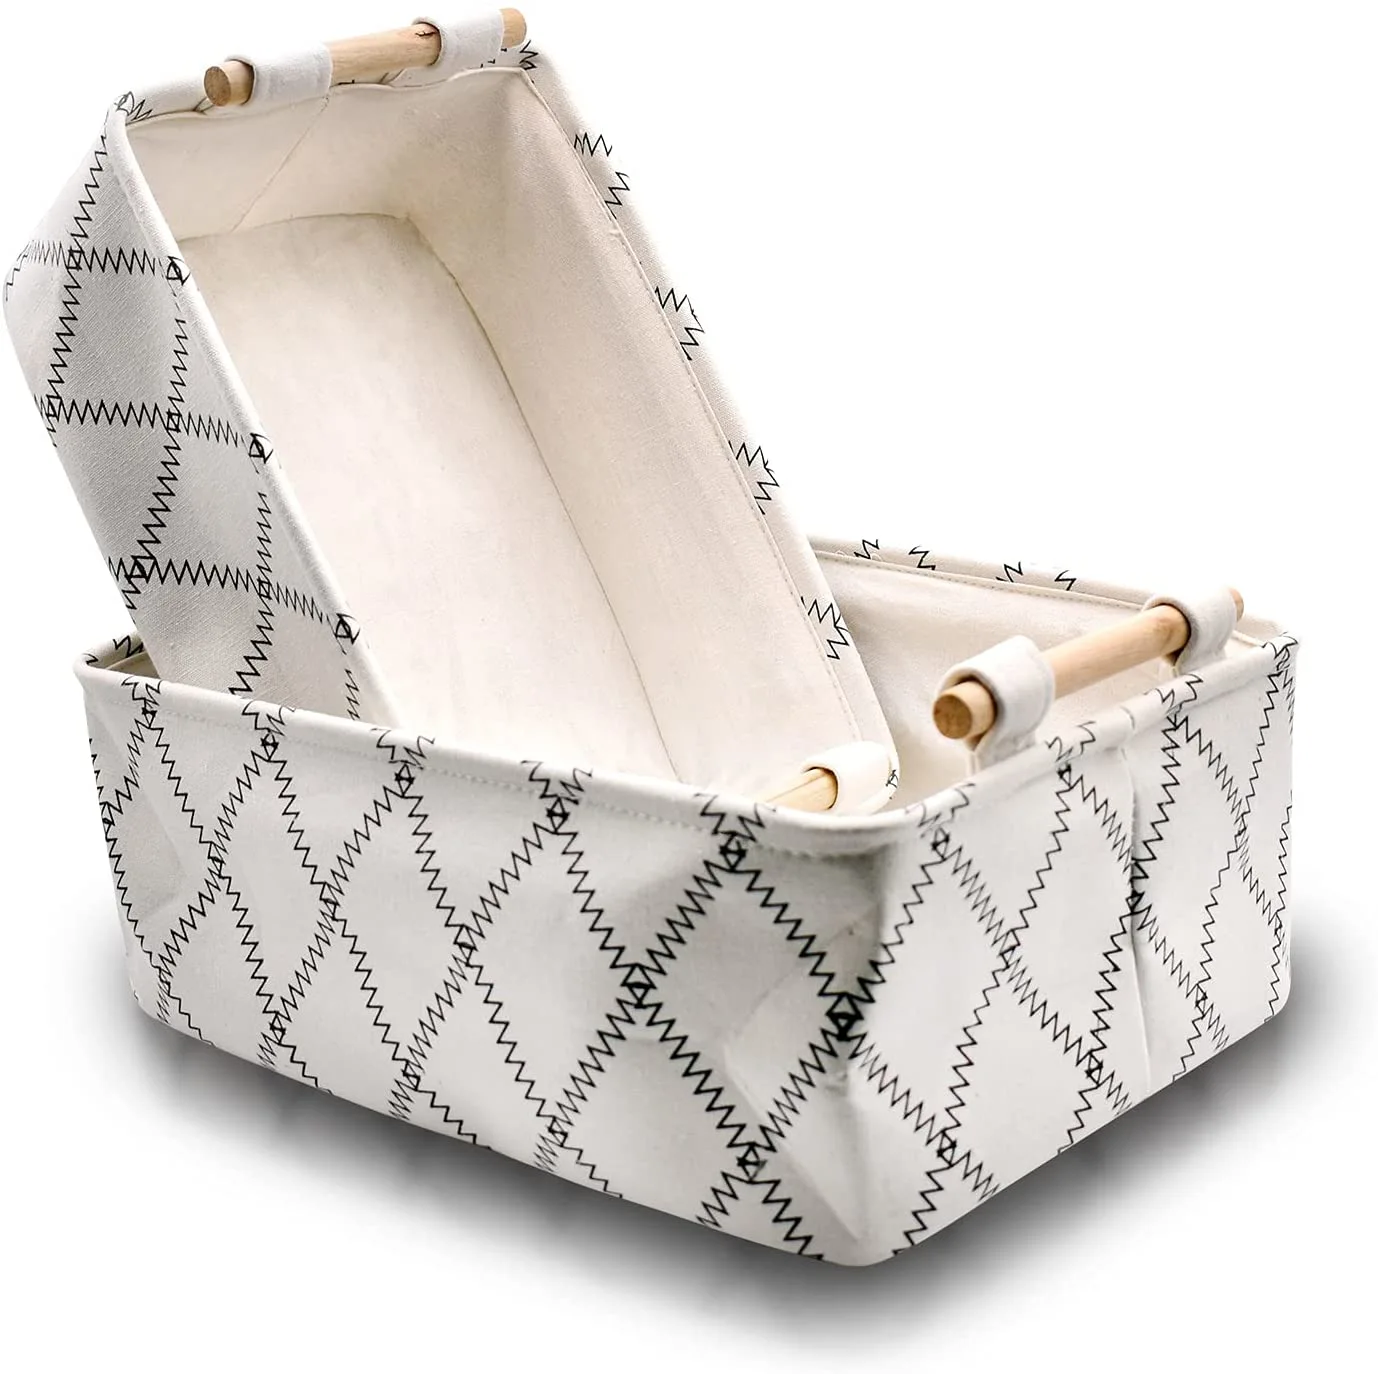 Hot Selling Collapsible other Fabric Storage basket for toys box foldable with wooden handle